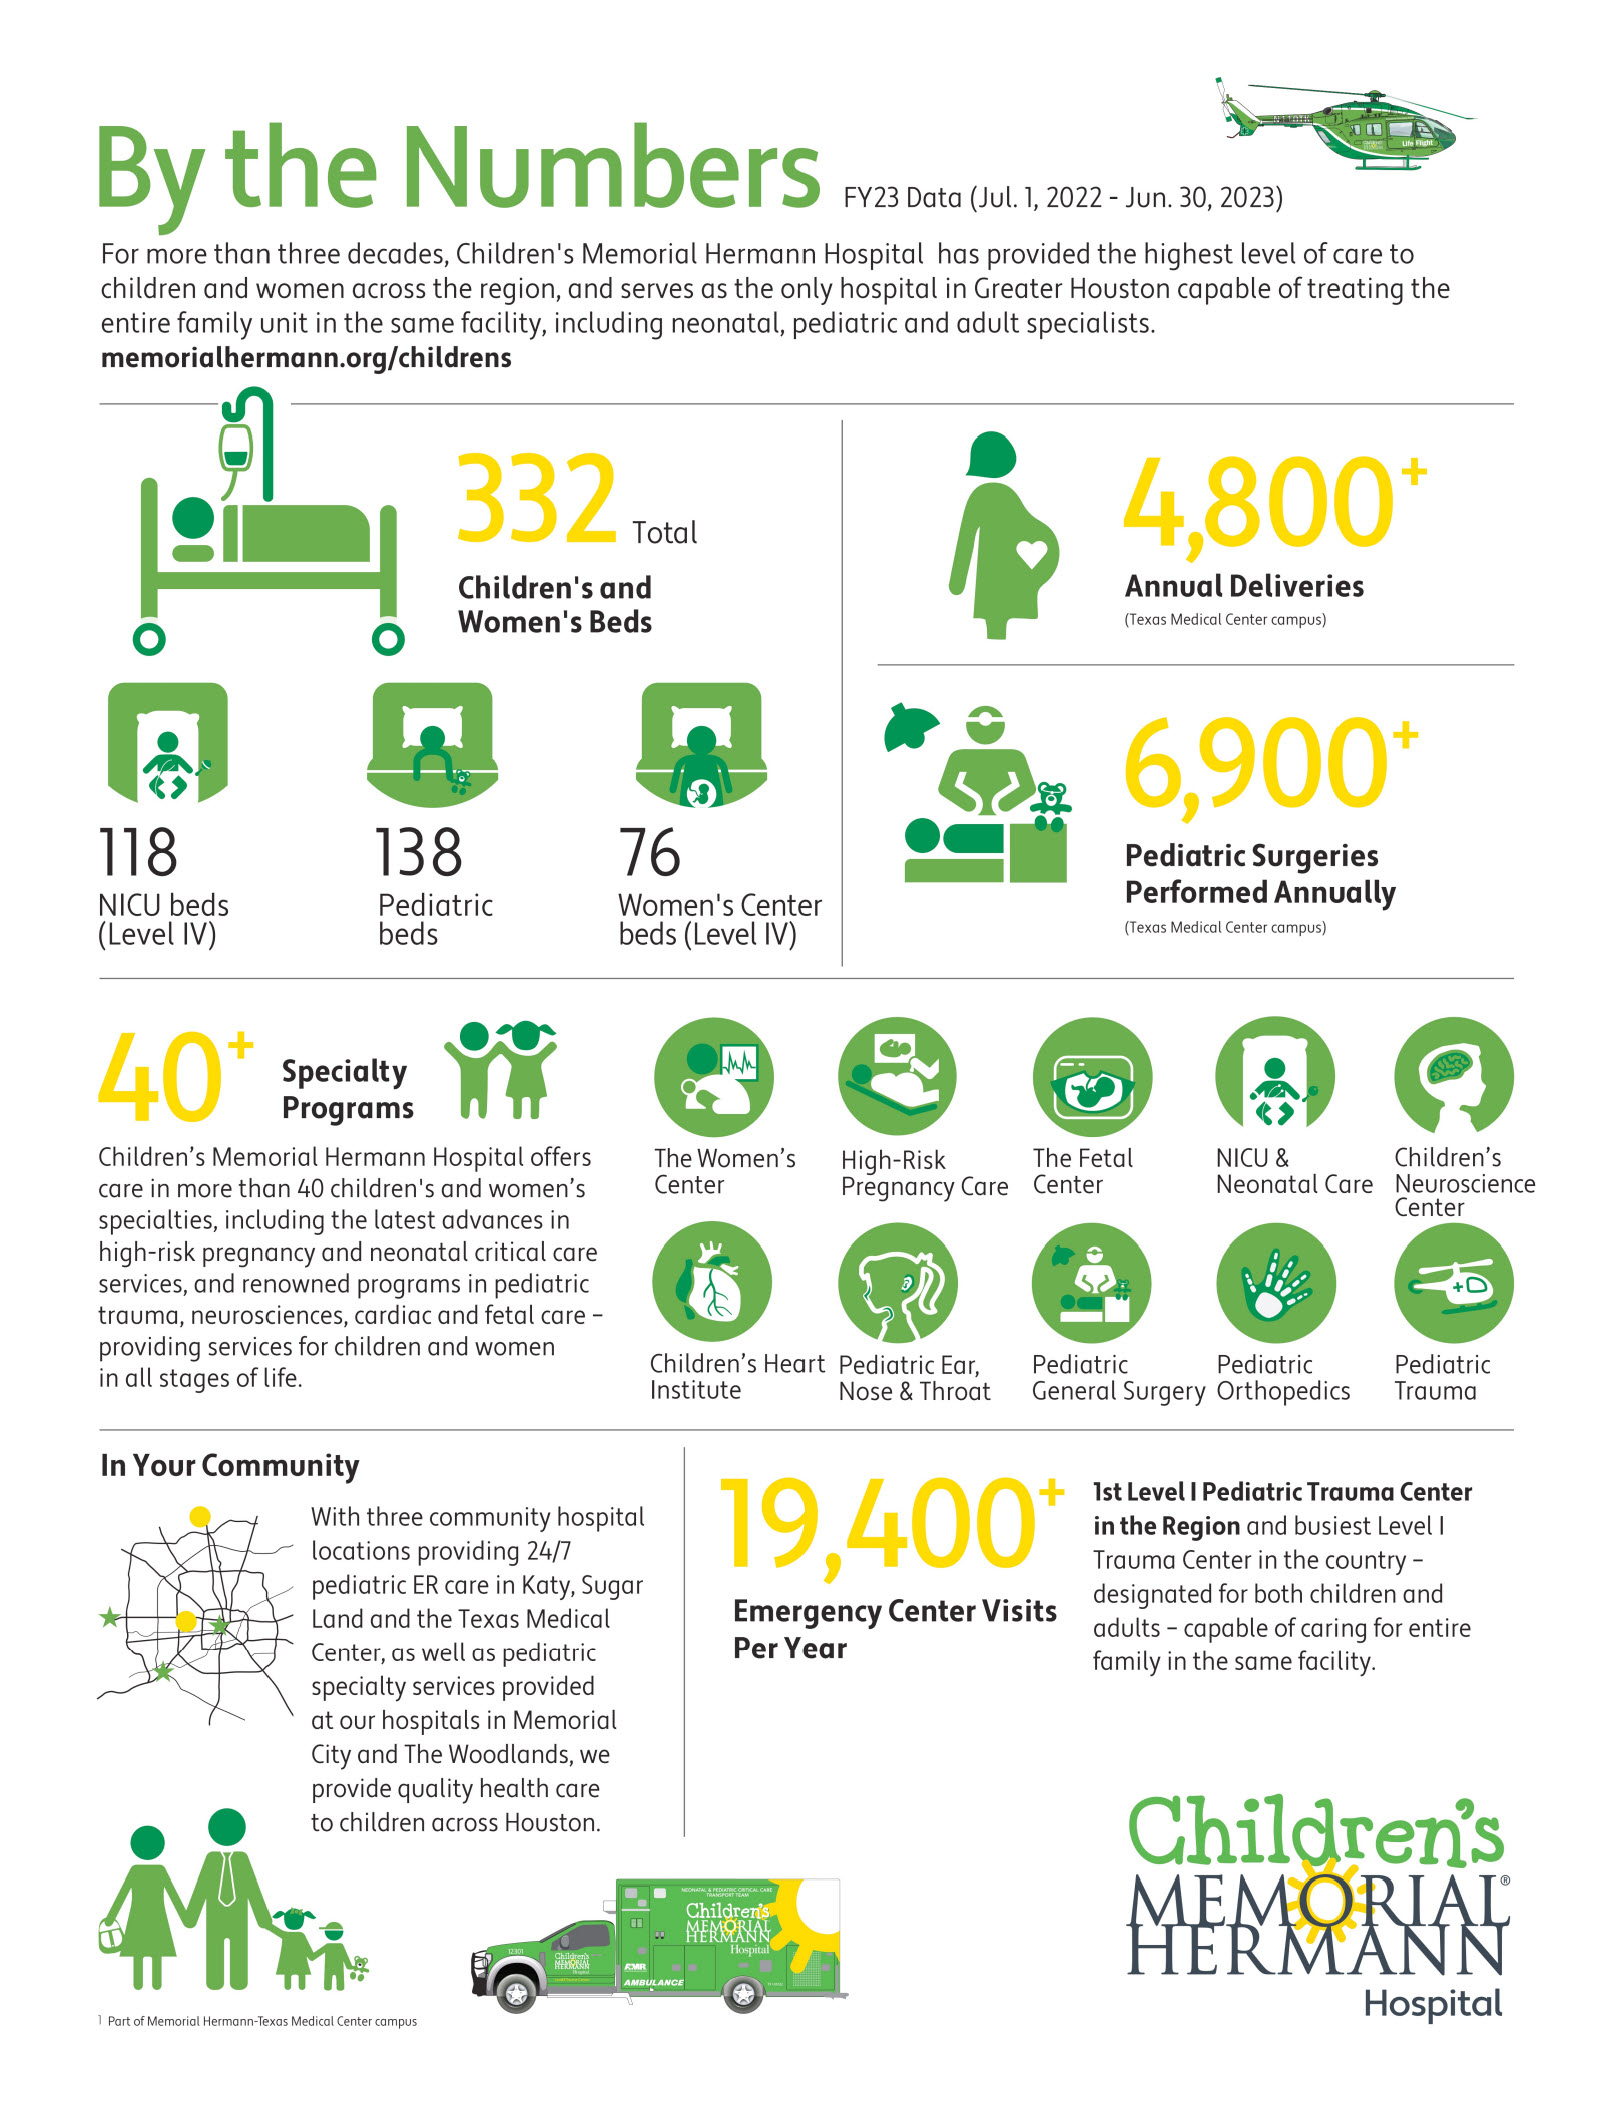 Children's Memorial Hermann by the numbers